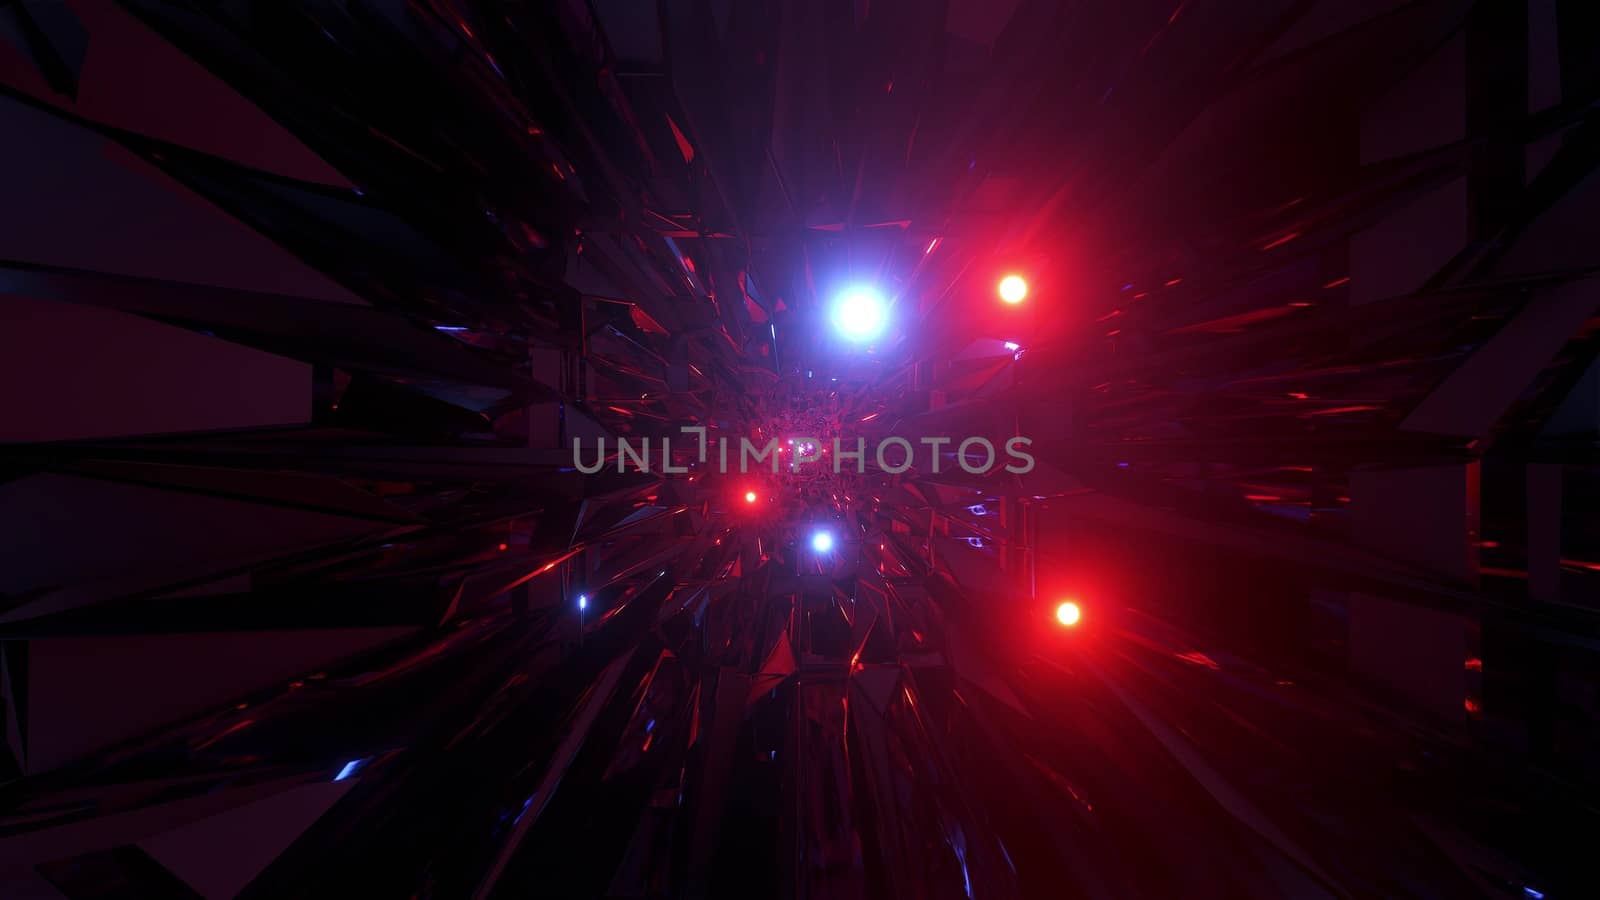 abstract tunnel corridor with glowing spheres 3d illustration backgrounds wallpaper graphic artwork by tunnelmotions